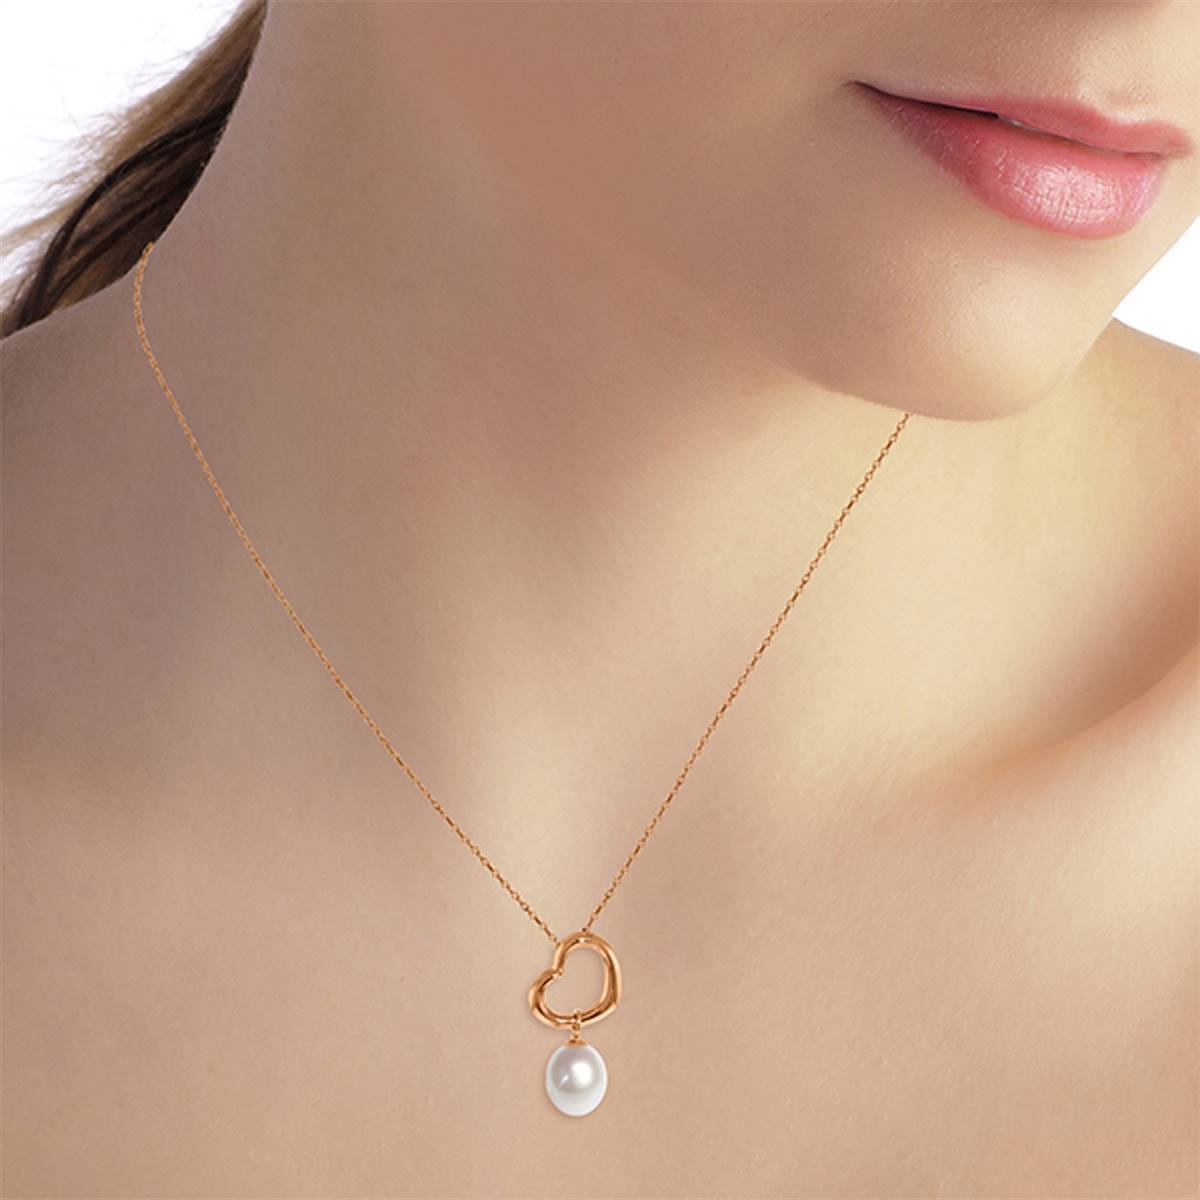 14K Solid Rose Gold Heart Necklace w/ Dangling Natural Pearl